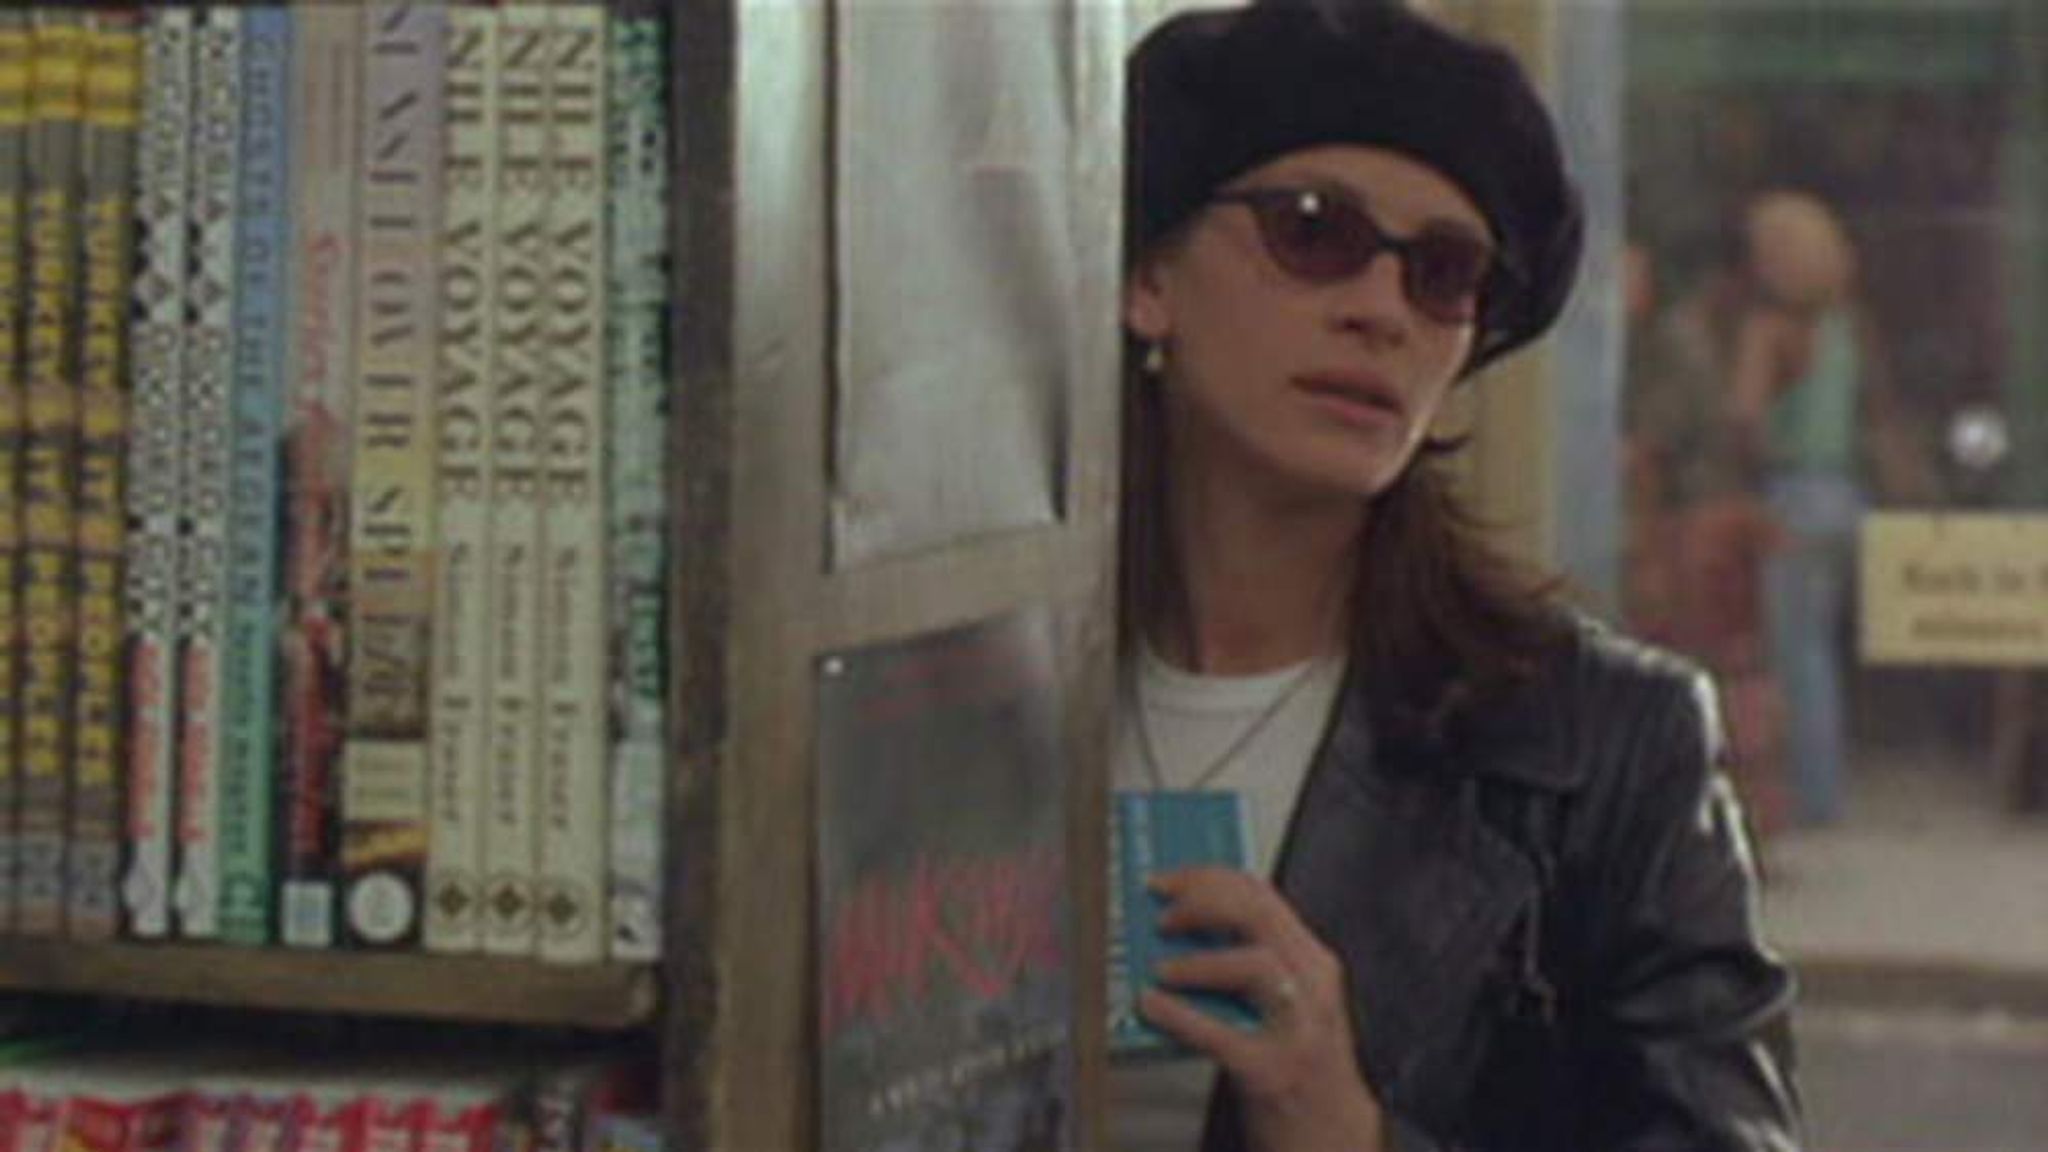 Iconic Book Shop In Notting Hill Film 'Saved